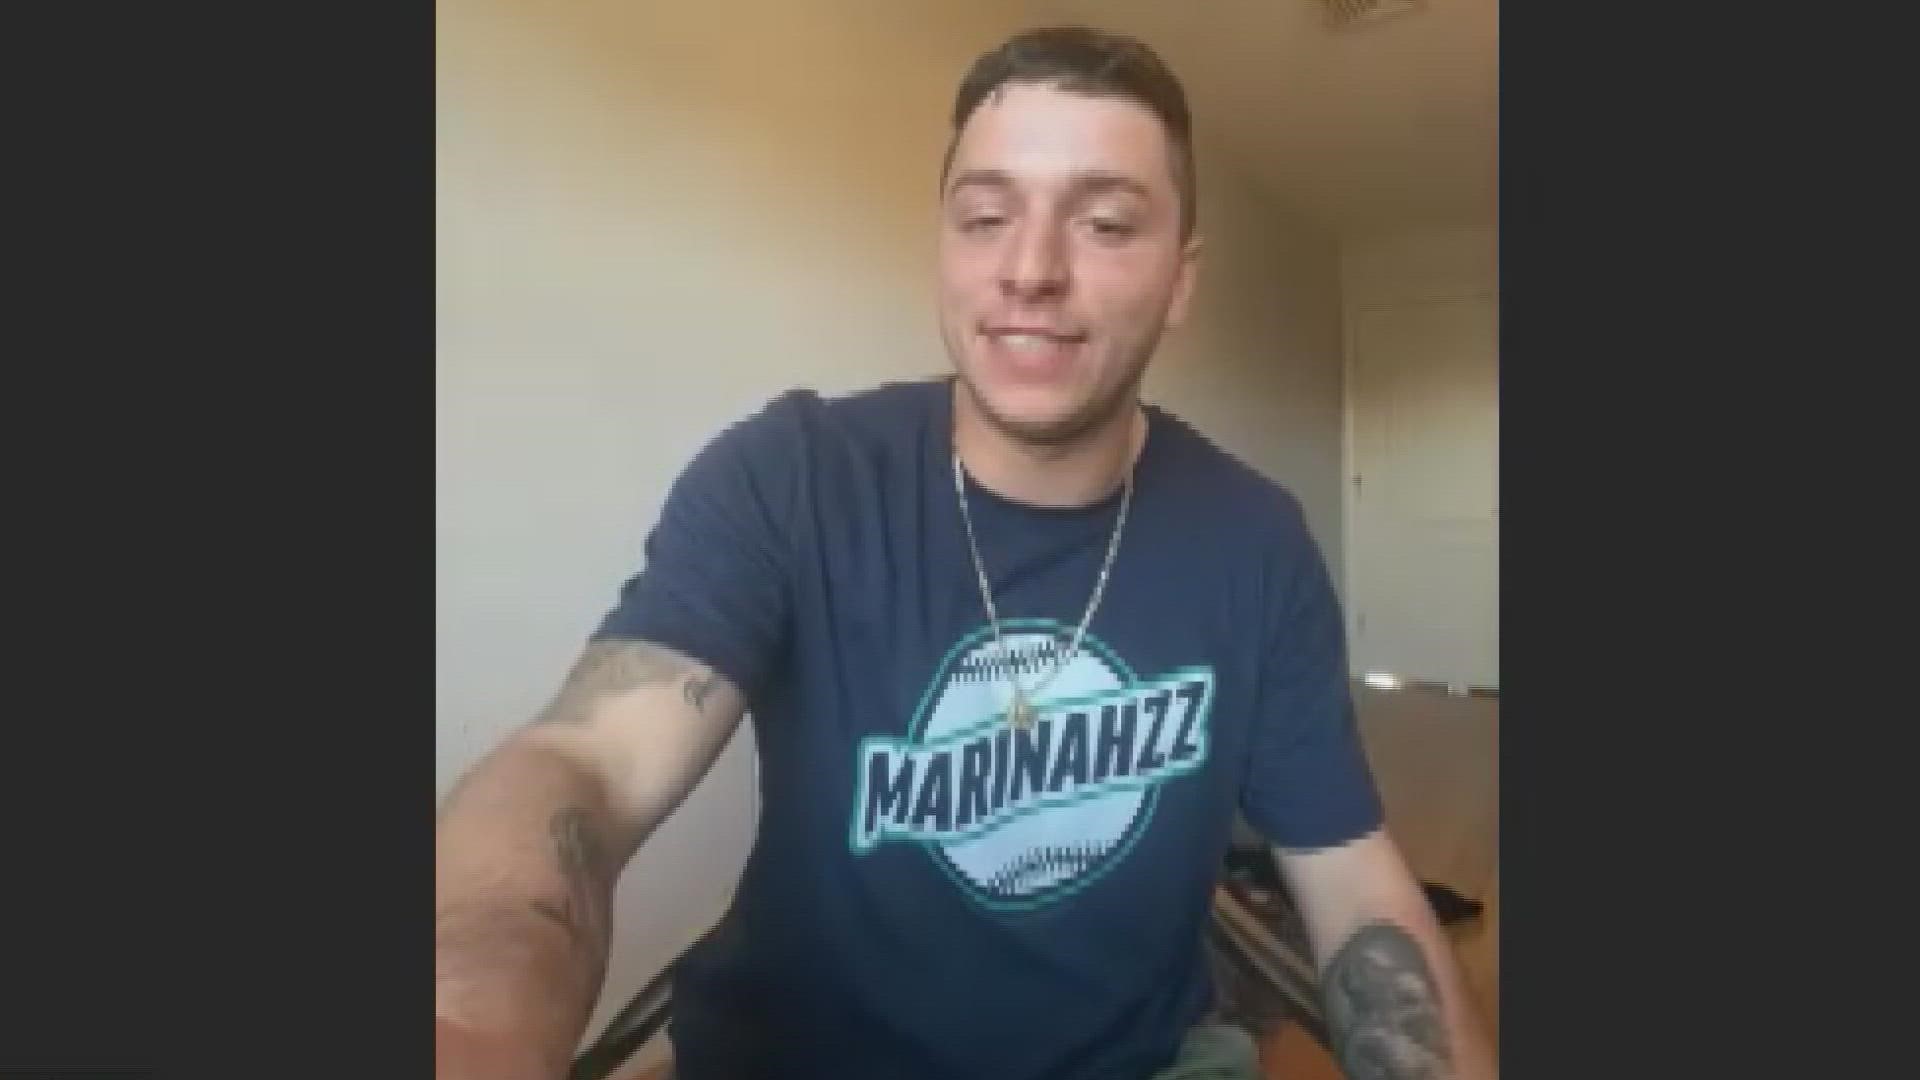 nickyscarlotta on X: HUGE SHOUTOUT to the @Mariners for sending me my own  custom “marinahzz” jersey💚💙 SEATTLE & MARINER NATION I love ya🤞🏼   / X